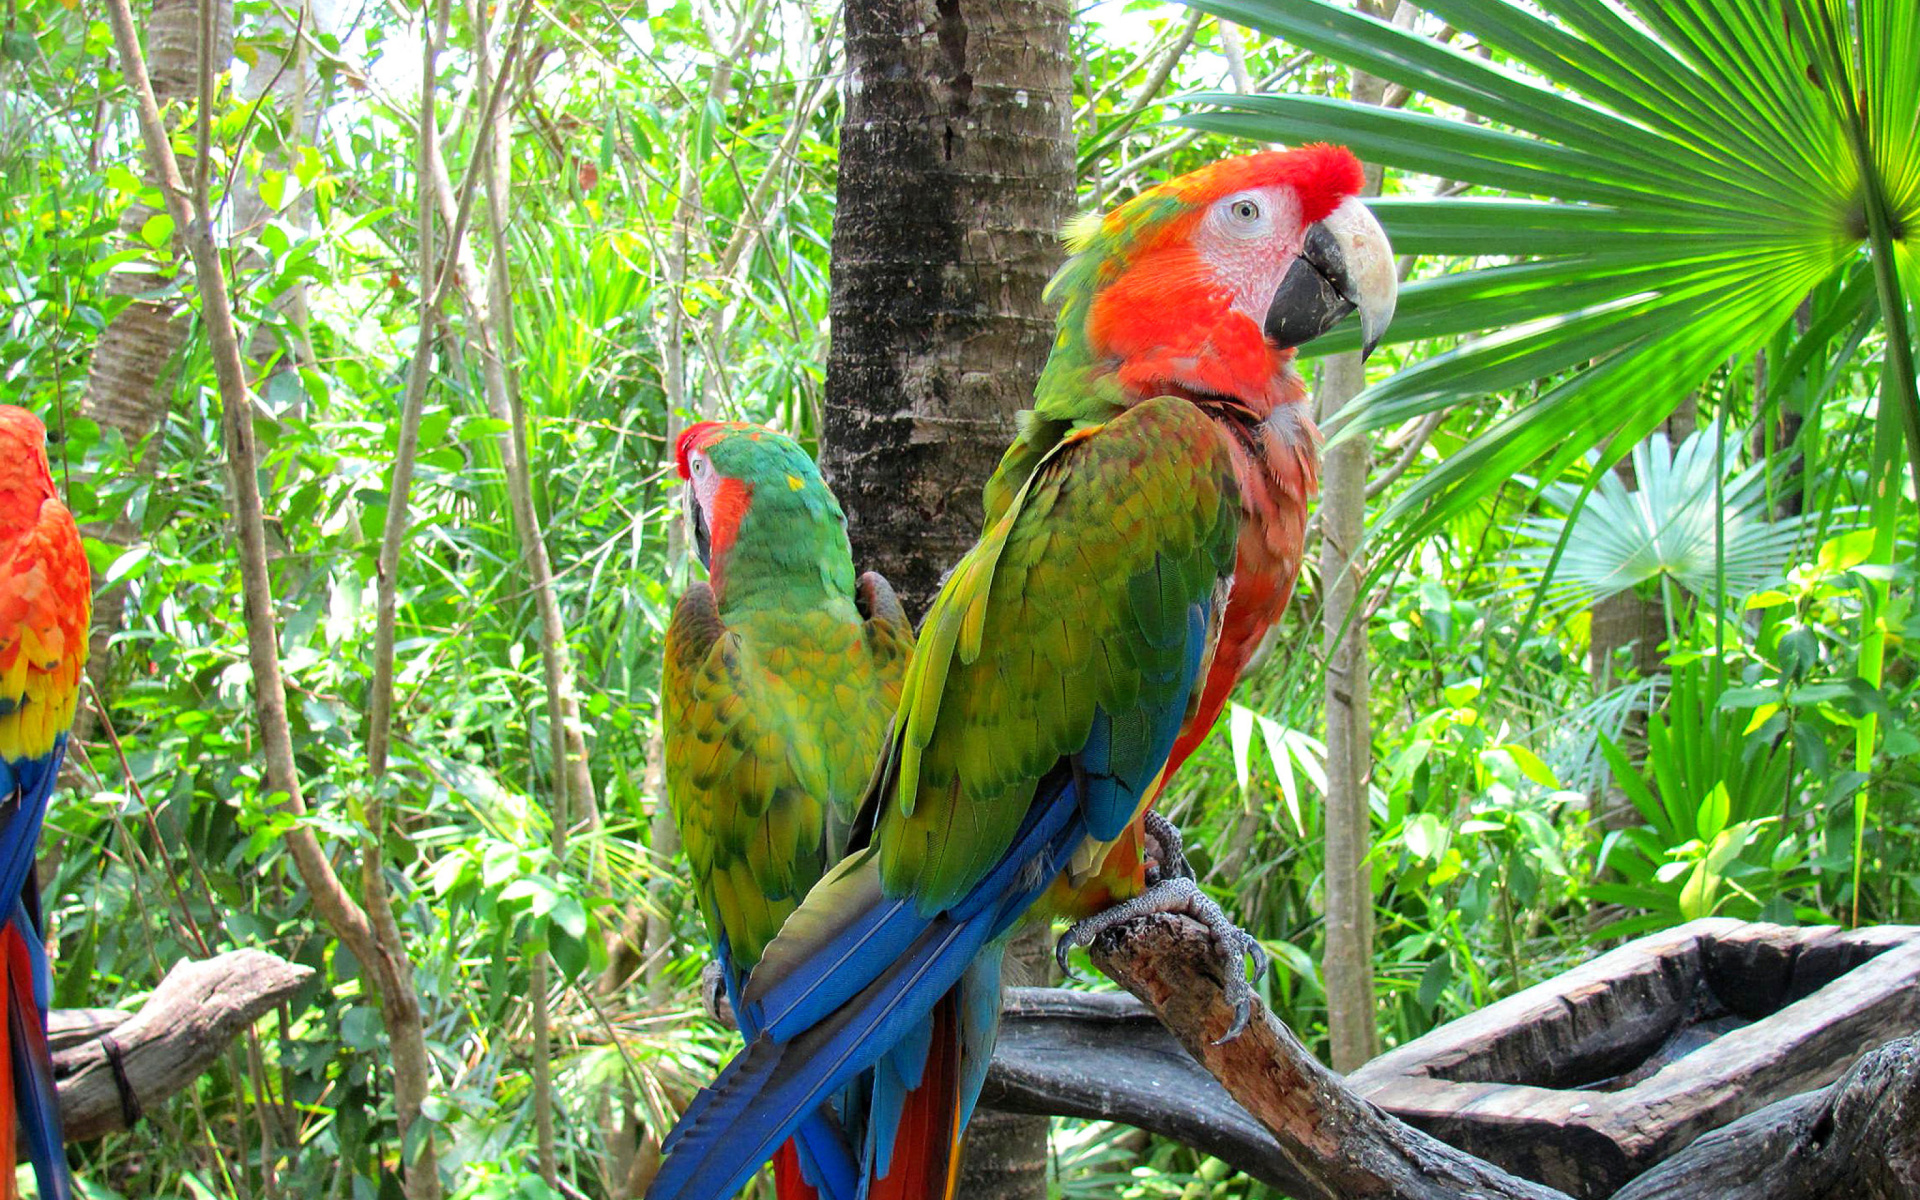 Macaw parrot Amazon forest screenshot #1 1920x1200